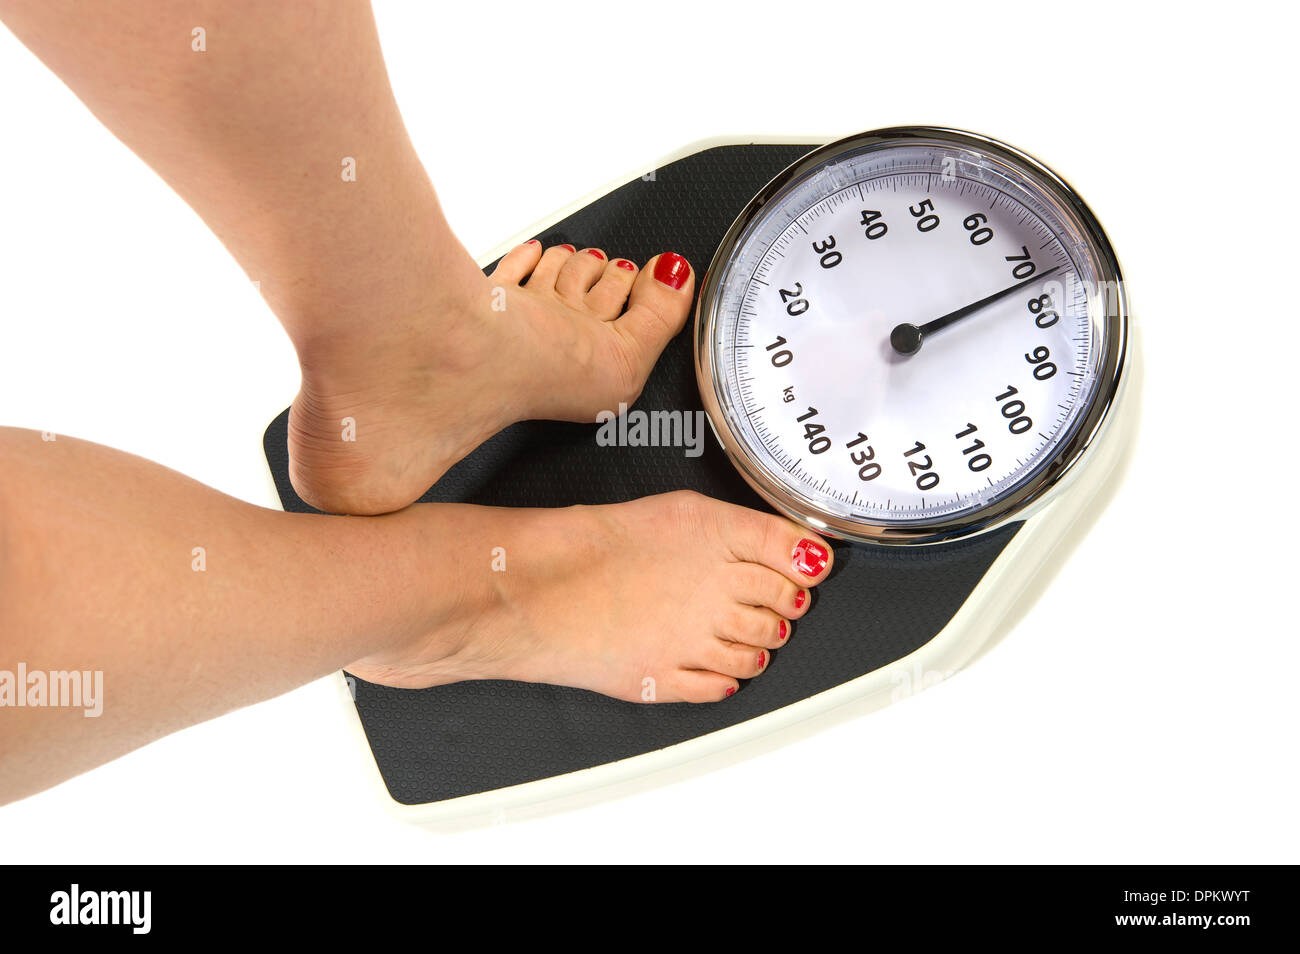 Help to lose kilograms with woman feet stepping on a weight scale Stock  Photo - Alamy